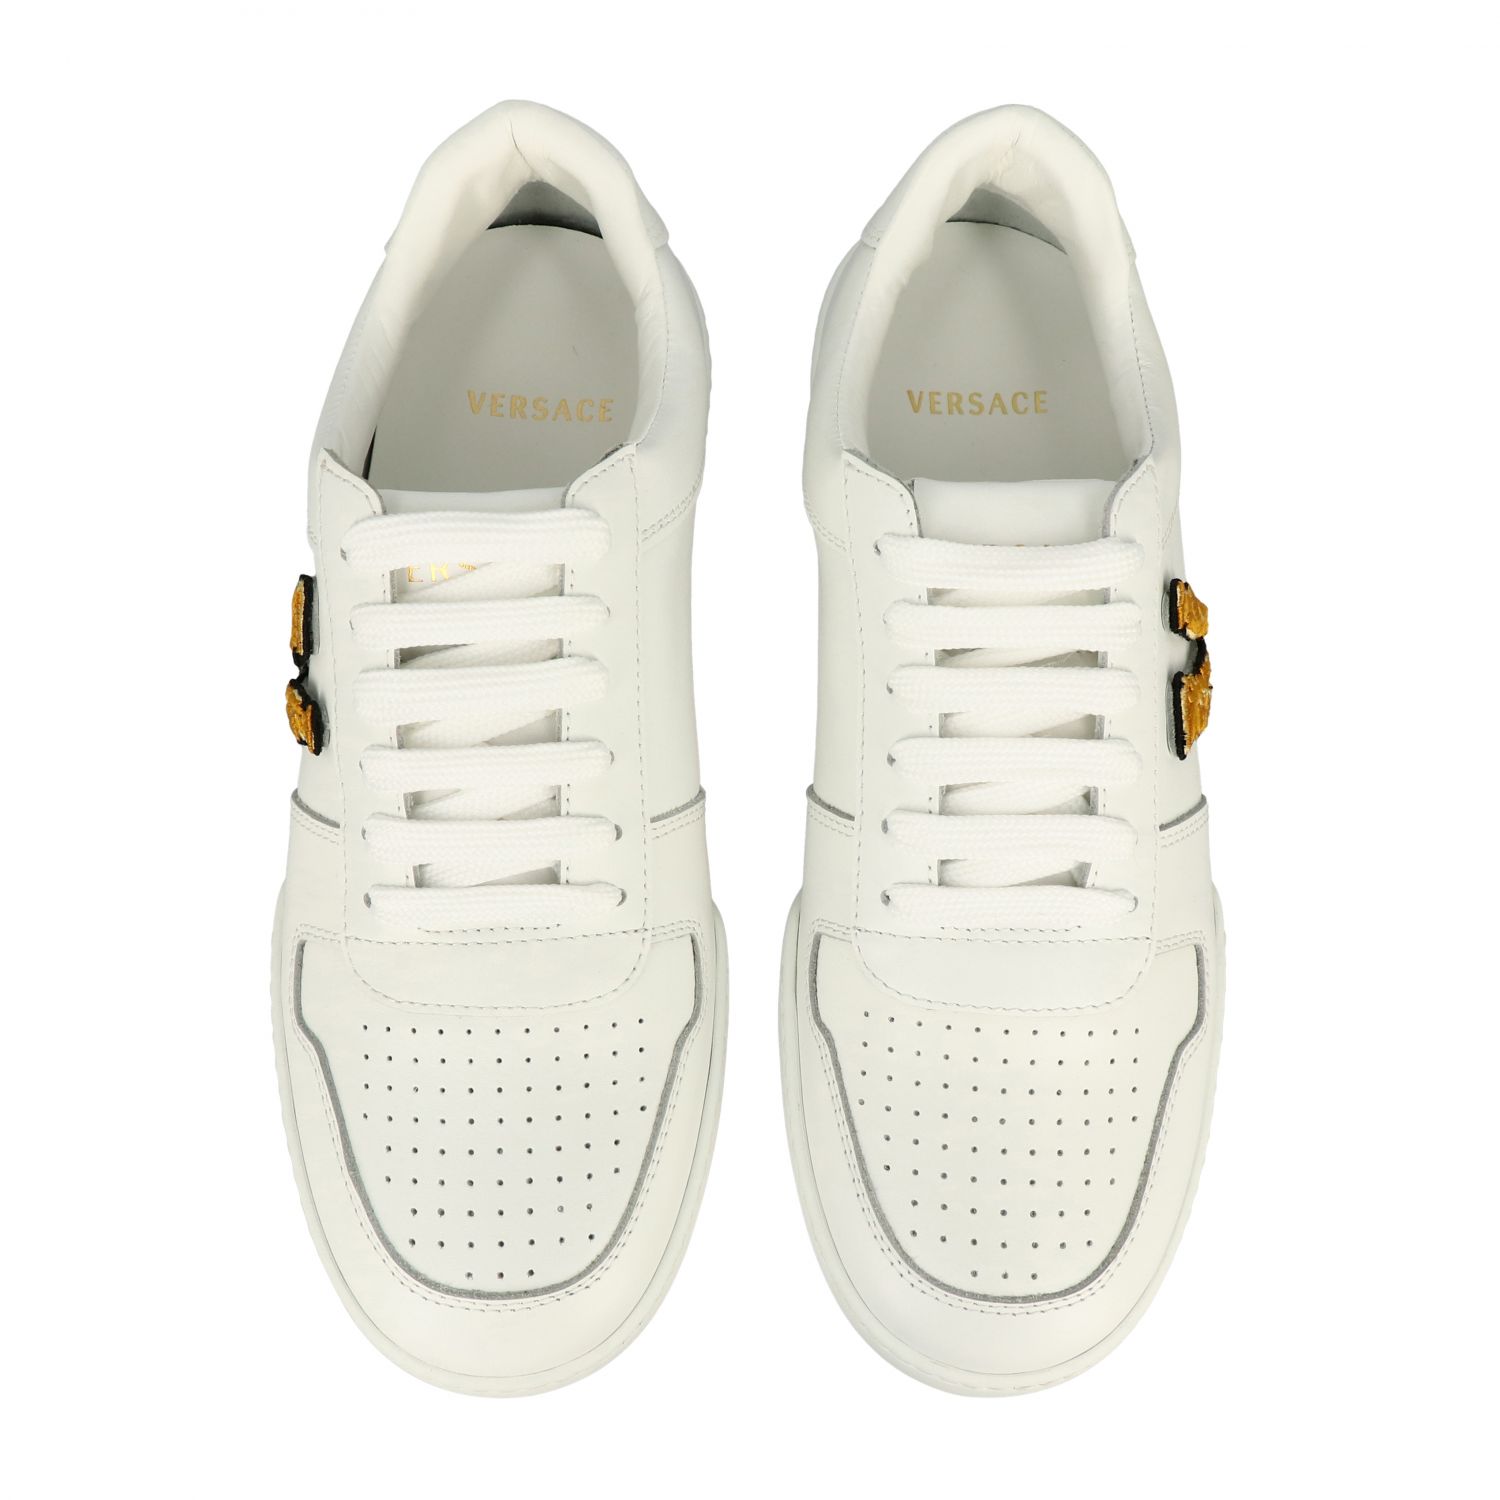 Versace Outlet: Ilus Virtus leather sneakers with V monogram - White ...